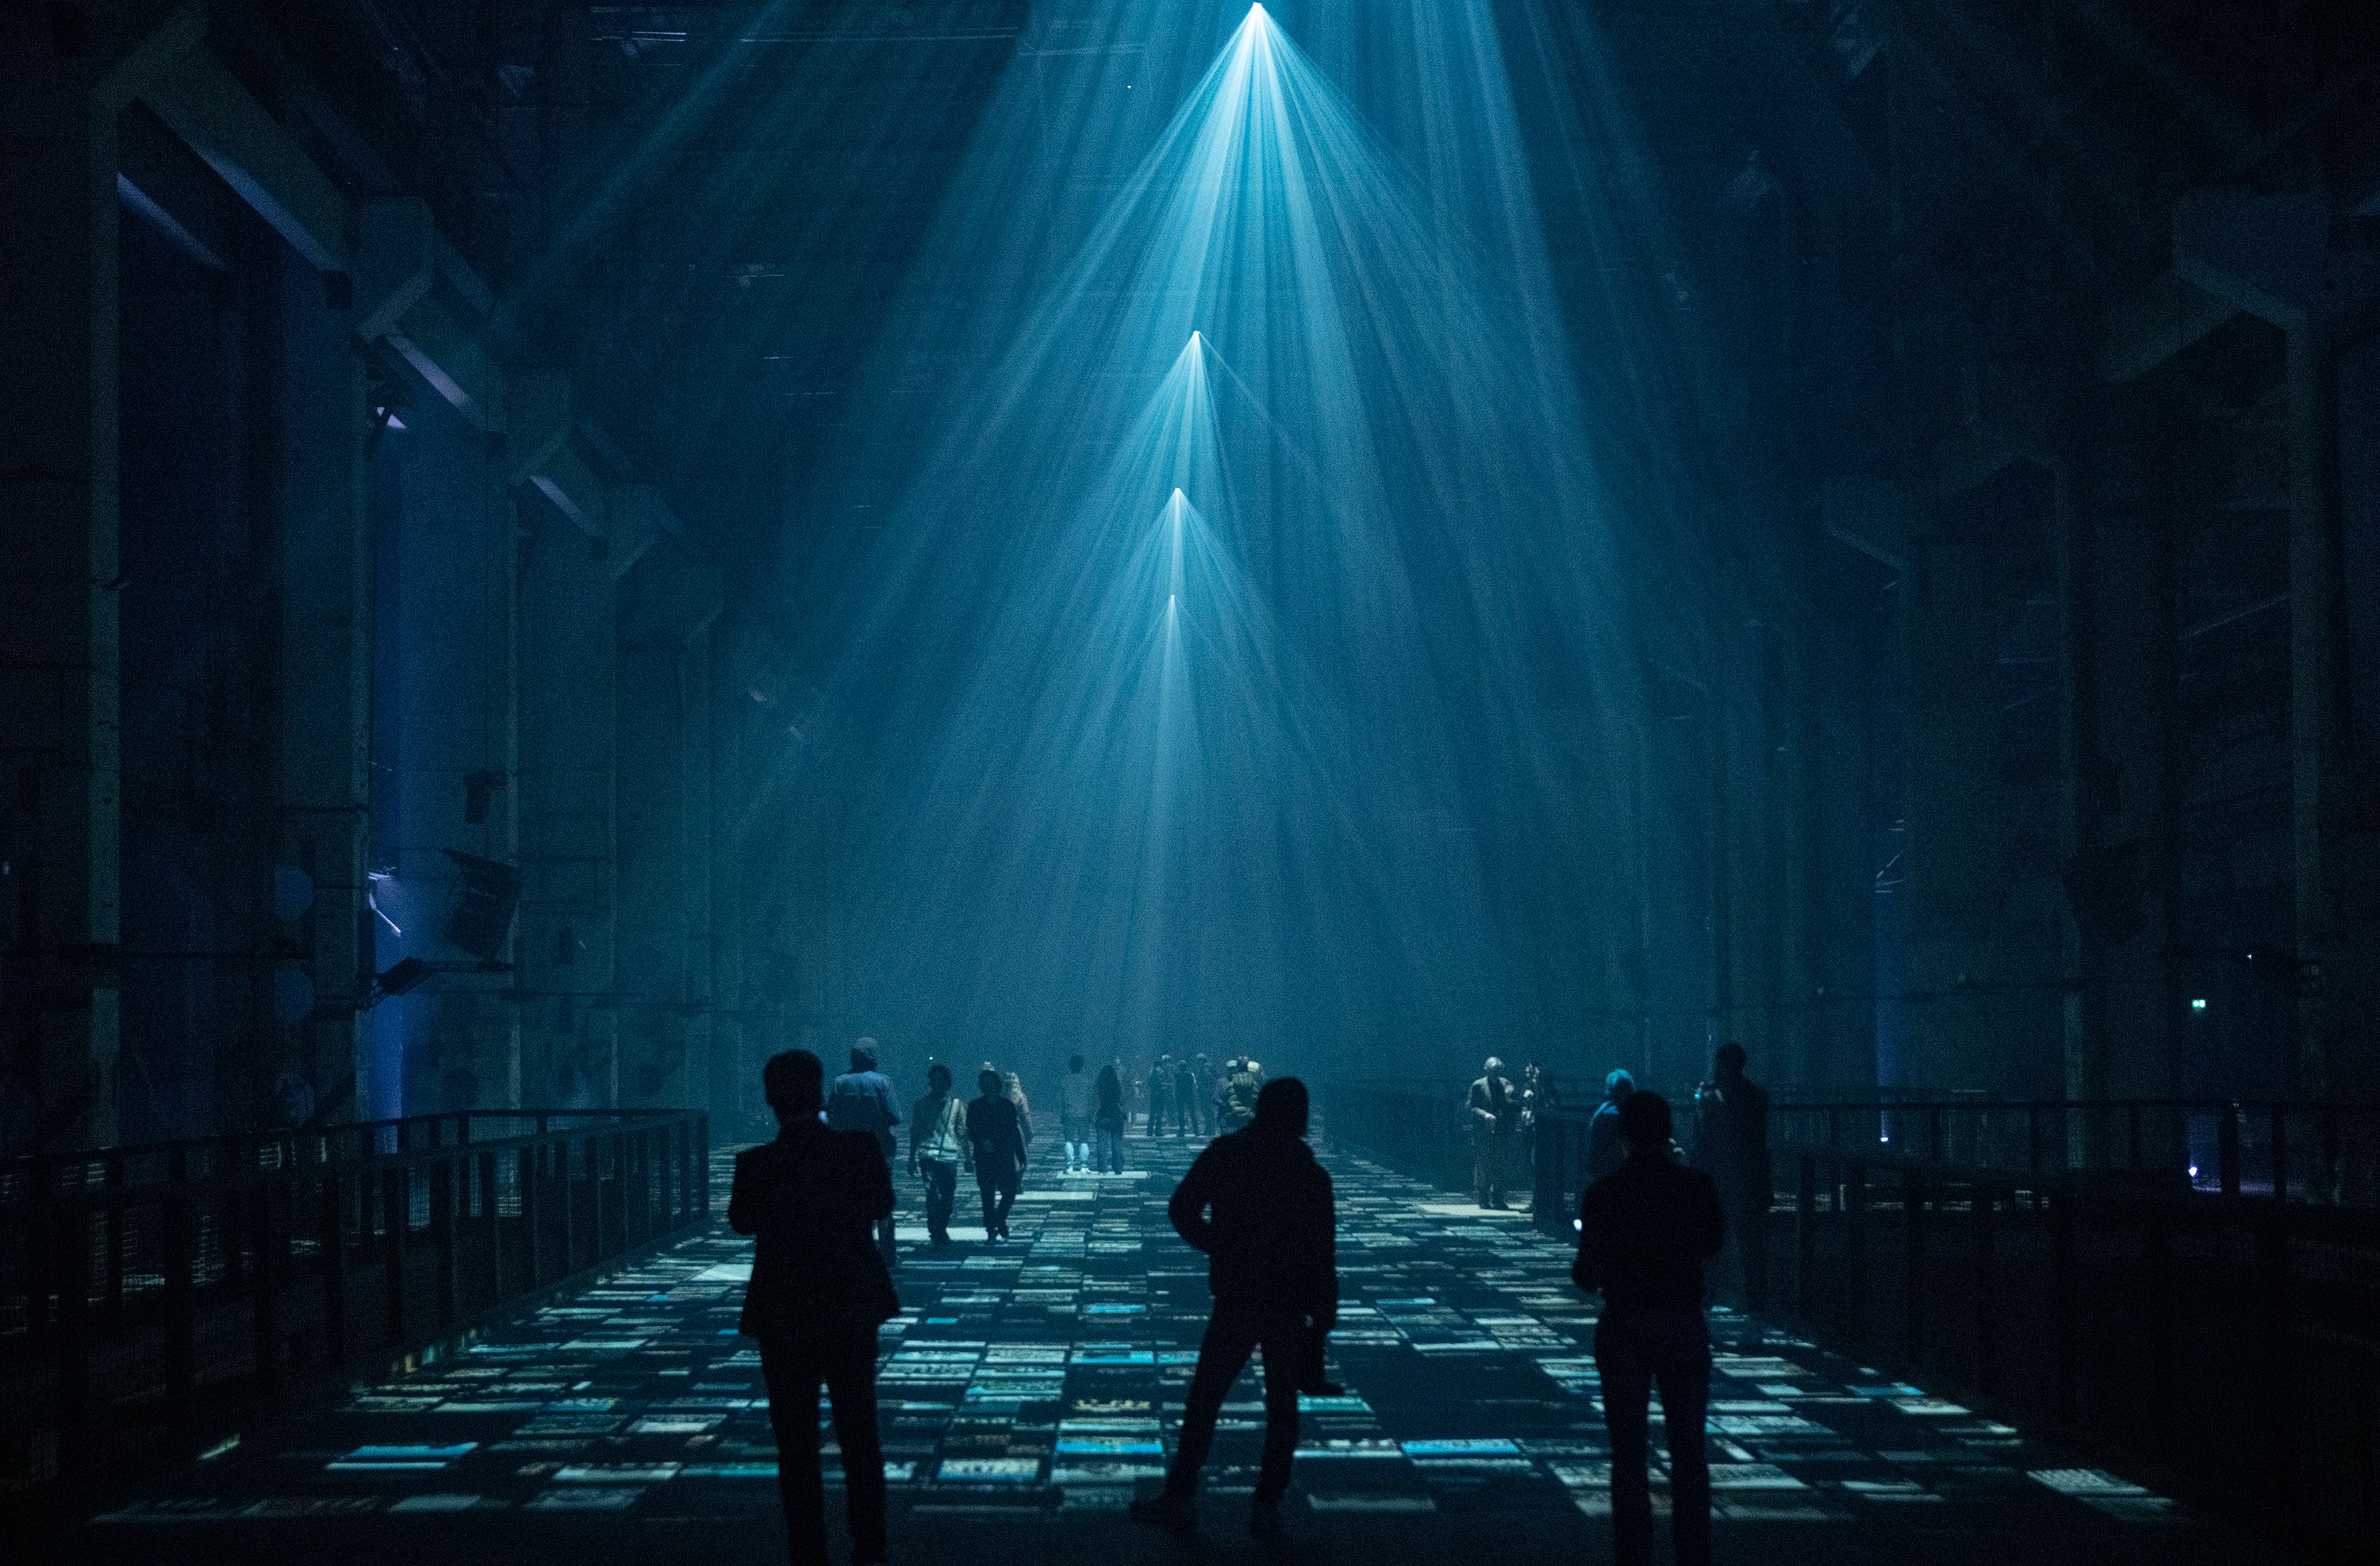 A group of people stands in a large, dimly lit industrial space with blue light beams shining down, creating geometric patterns on the floor.